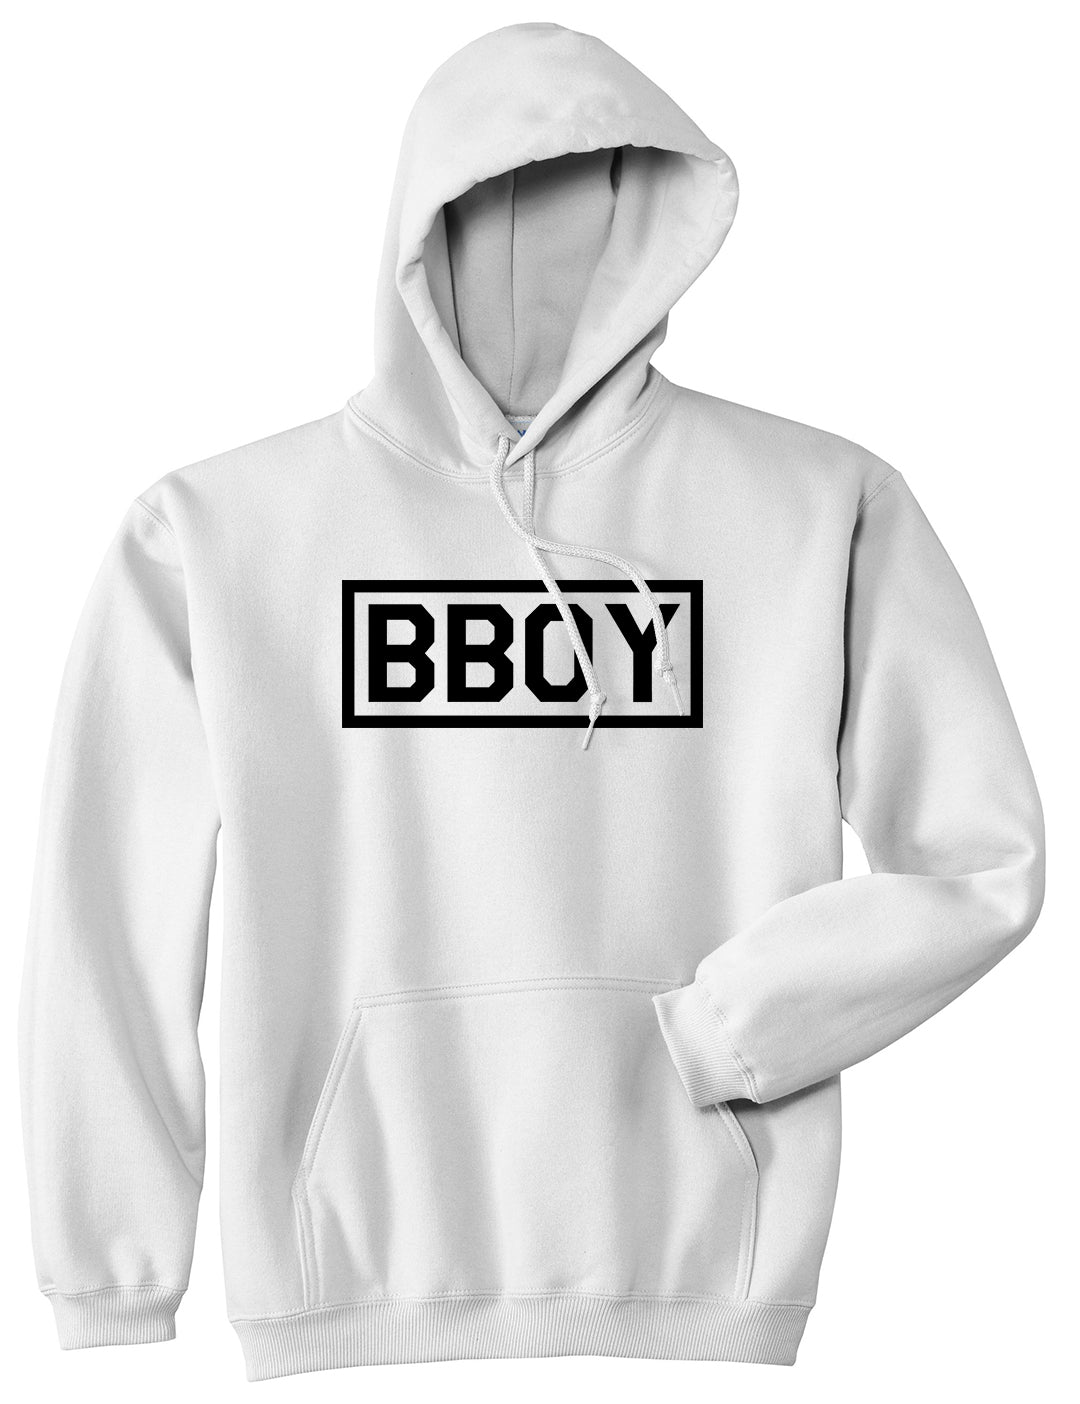 Bboy Breakdancing White Pullover Hoodie by Kings Of NY